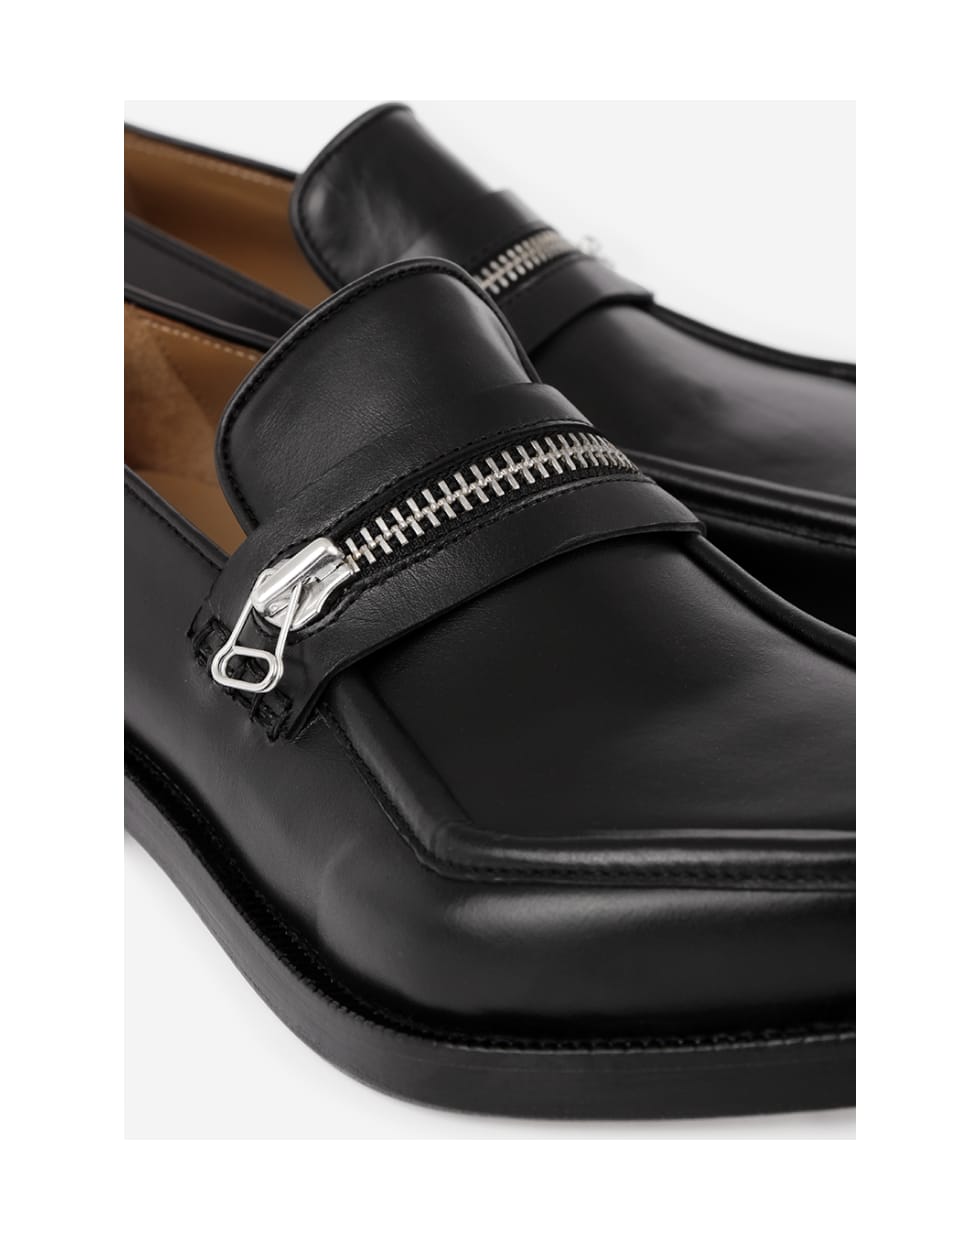 magliano monster loafer 41 | cprc.org.au